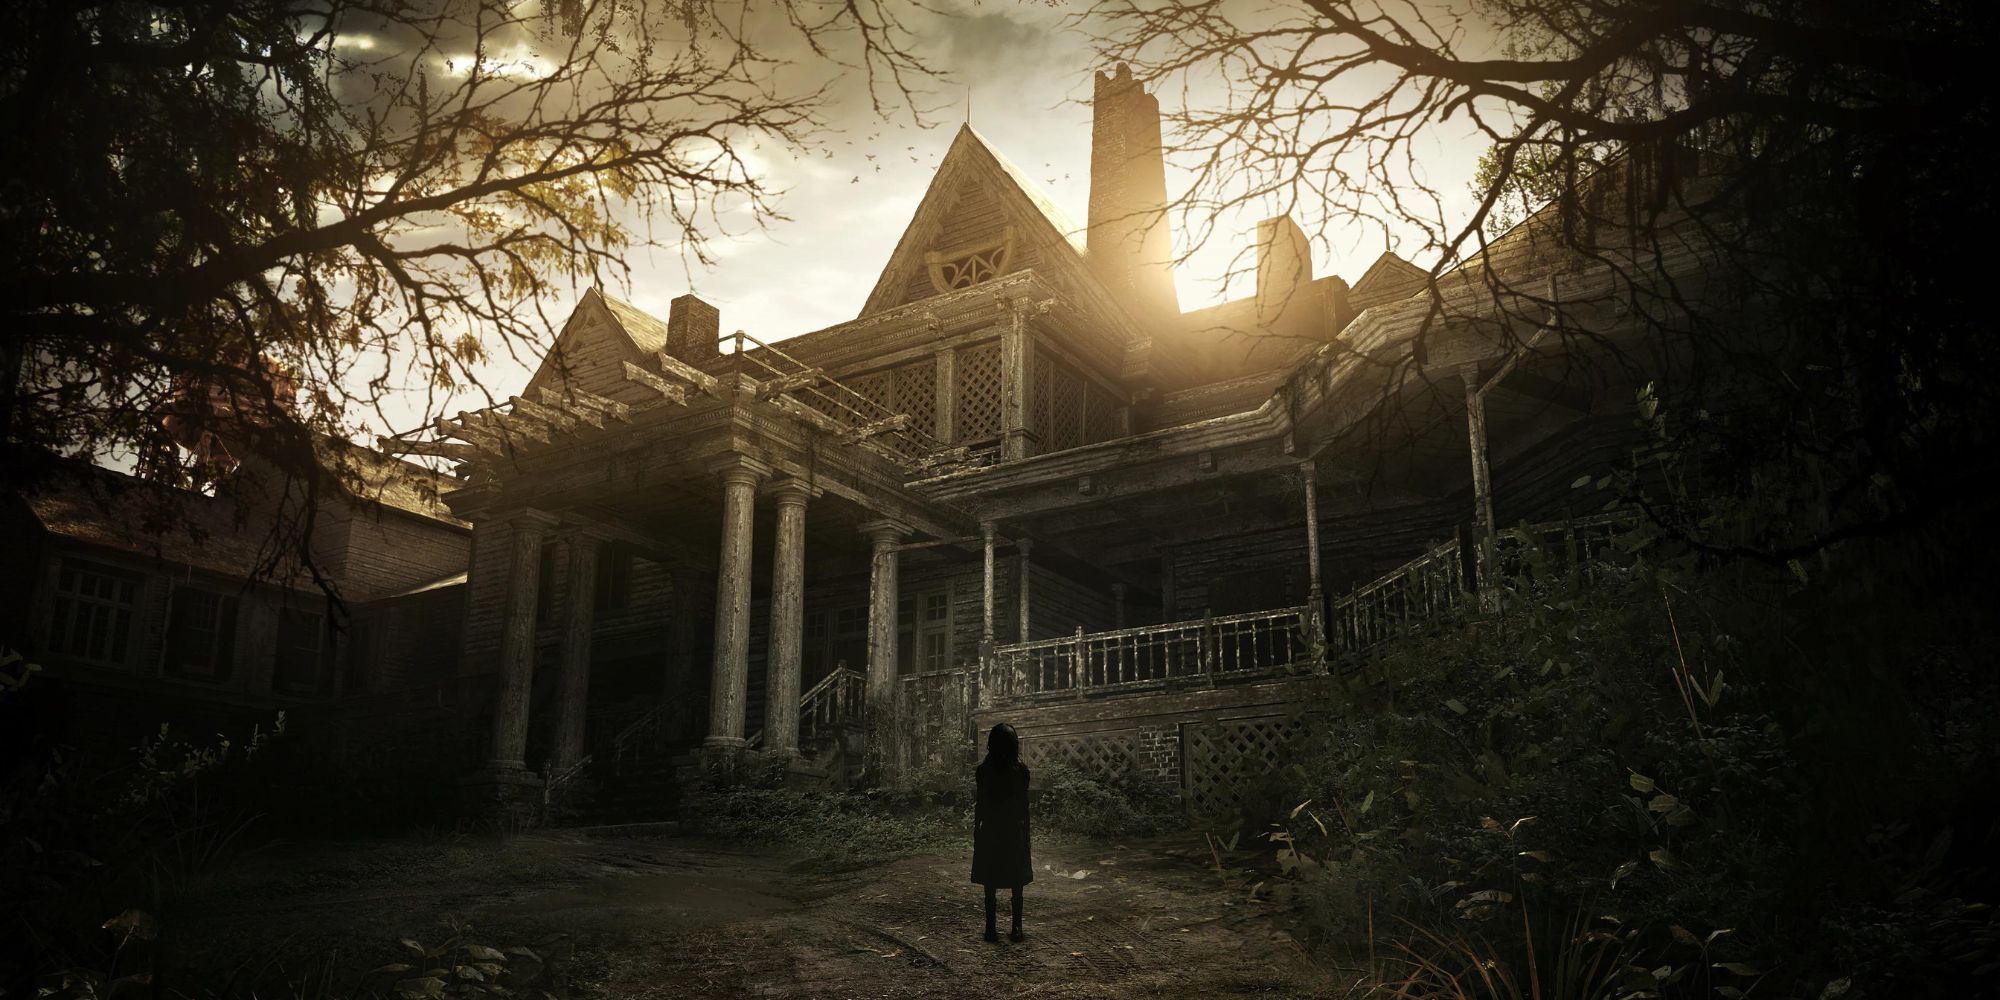 The silhouette of a child stands in front of the Baker house in Resident Evil 7 Biohazard.